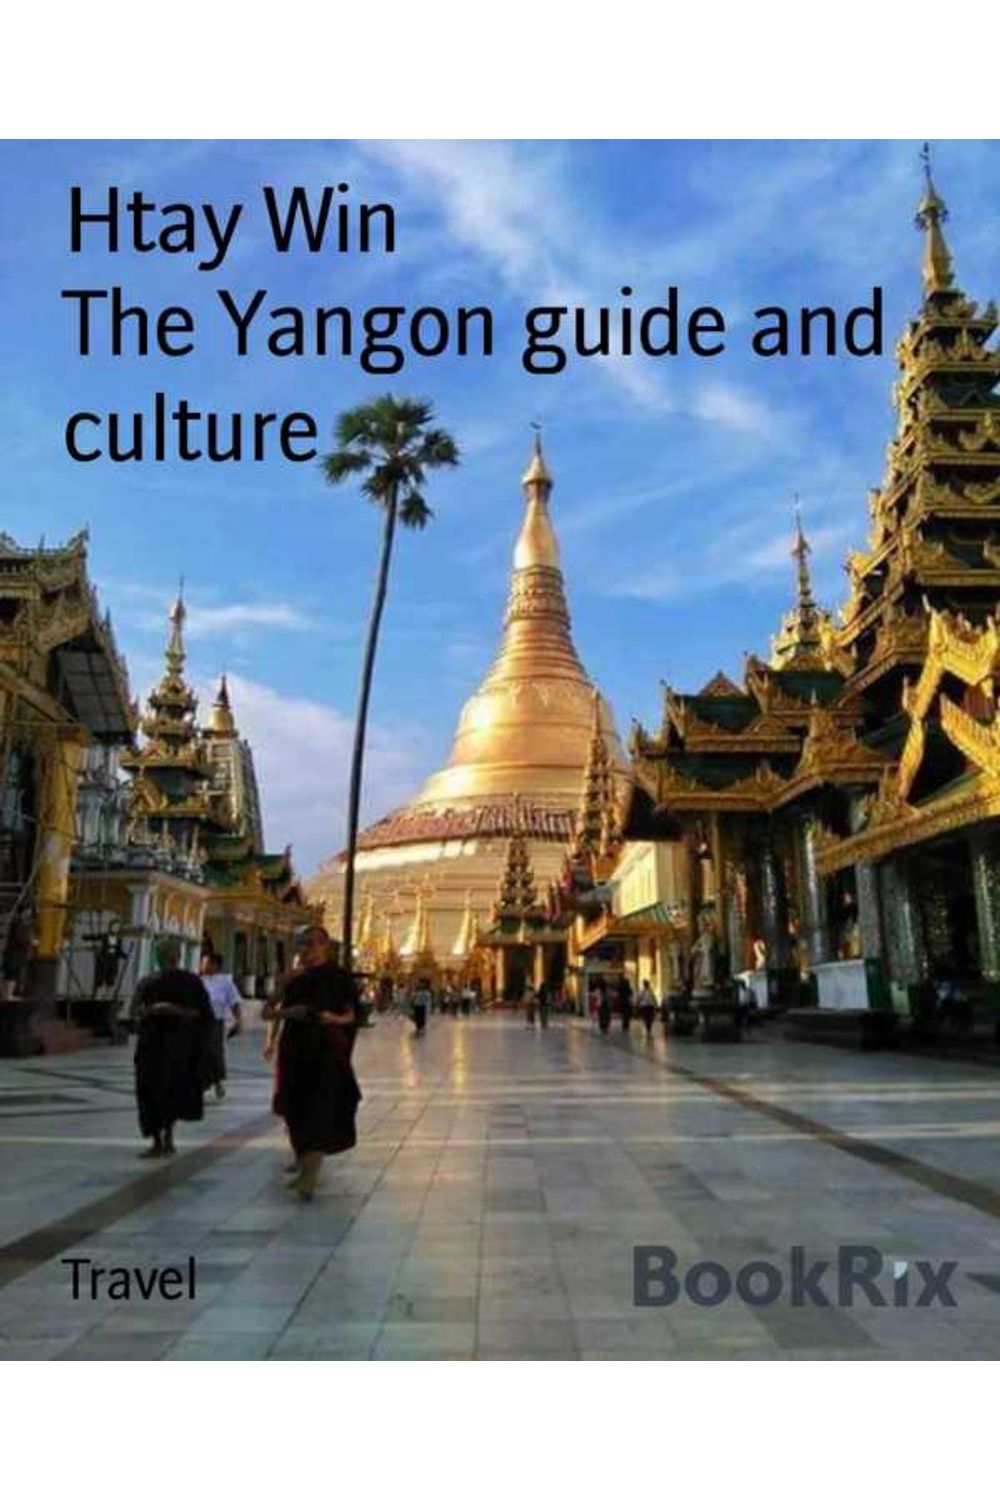 bw-the-yangon-guide-and-culture-bookrix-9783743845565